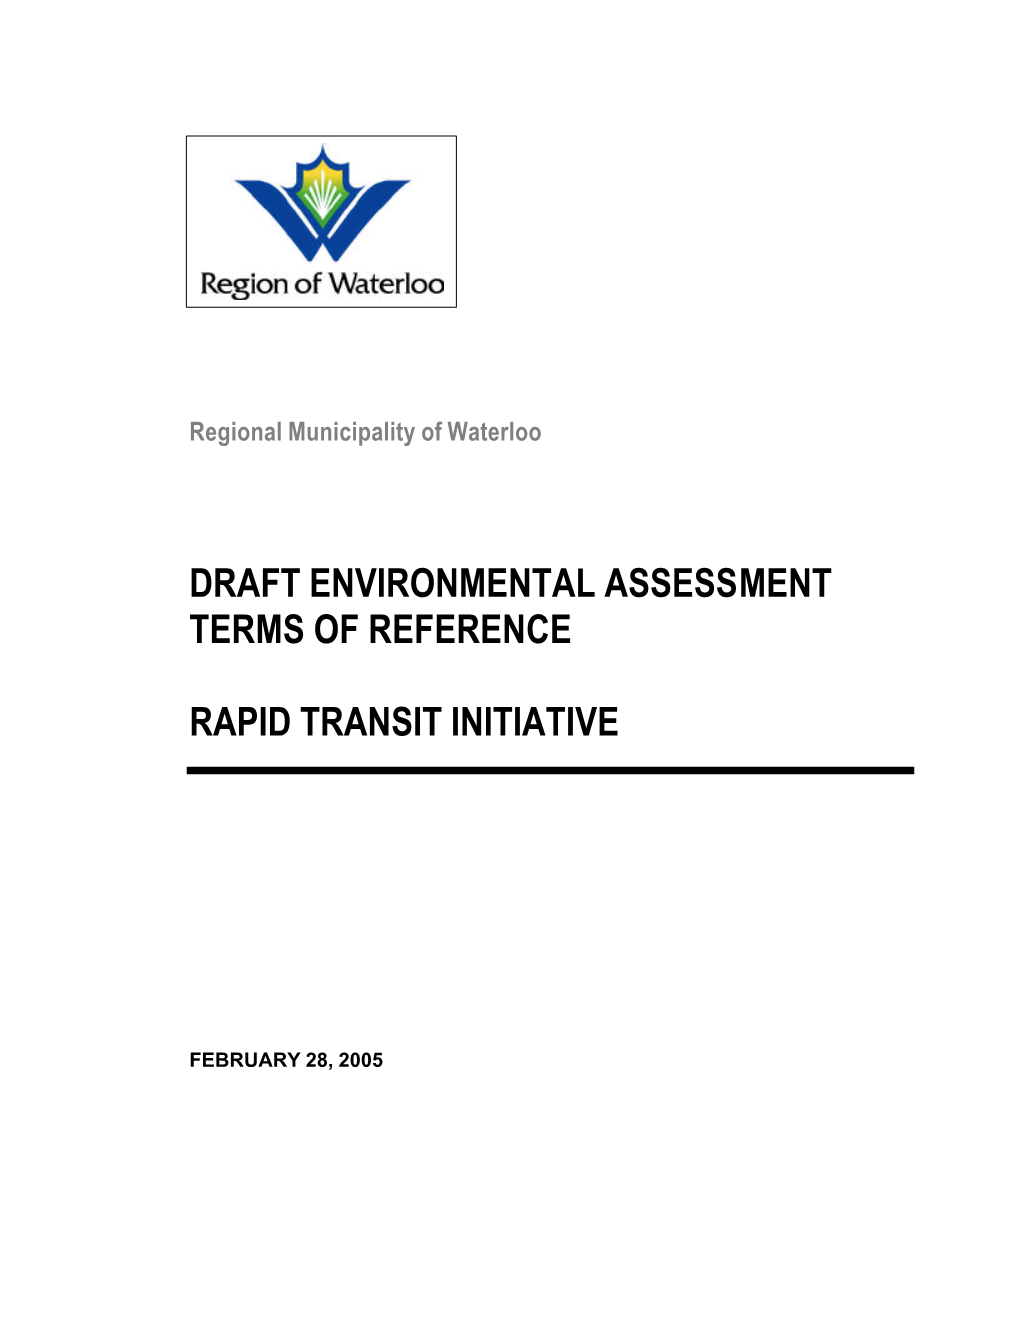 Draft Terms of Reference for the Rapid Transit Individual Environmental